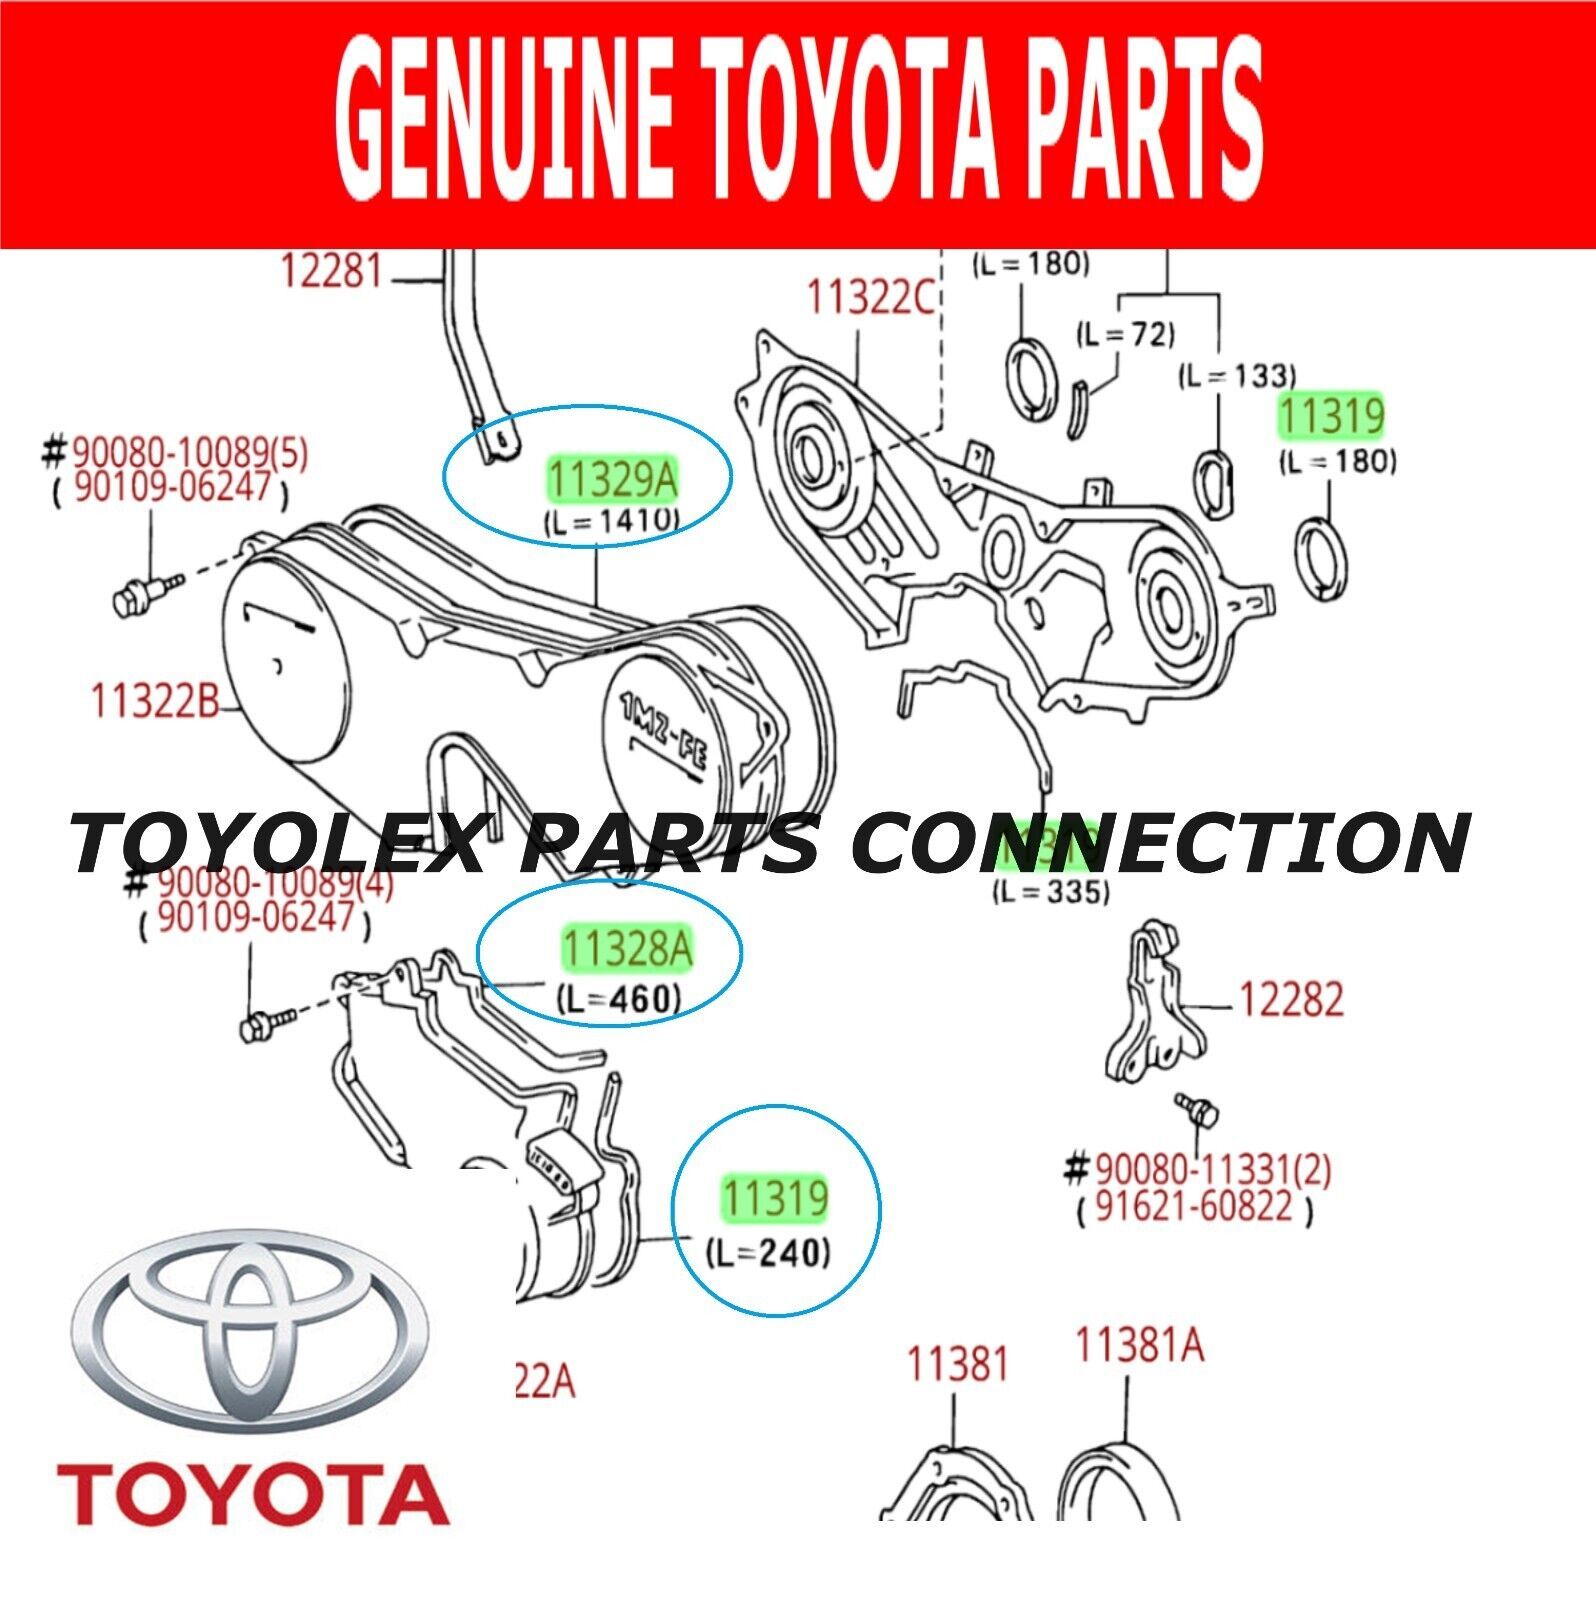 TOYOTA & LEXUS OEM NEW TIMING COVER GASKETS (3 PCS) FOR A V6 1MZFE 3.0 LITER ENG - $34.24